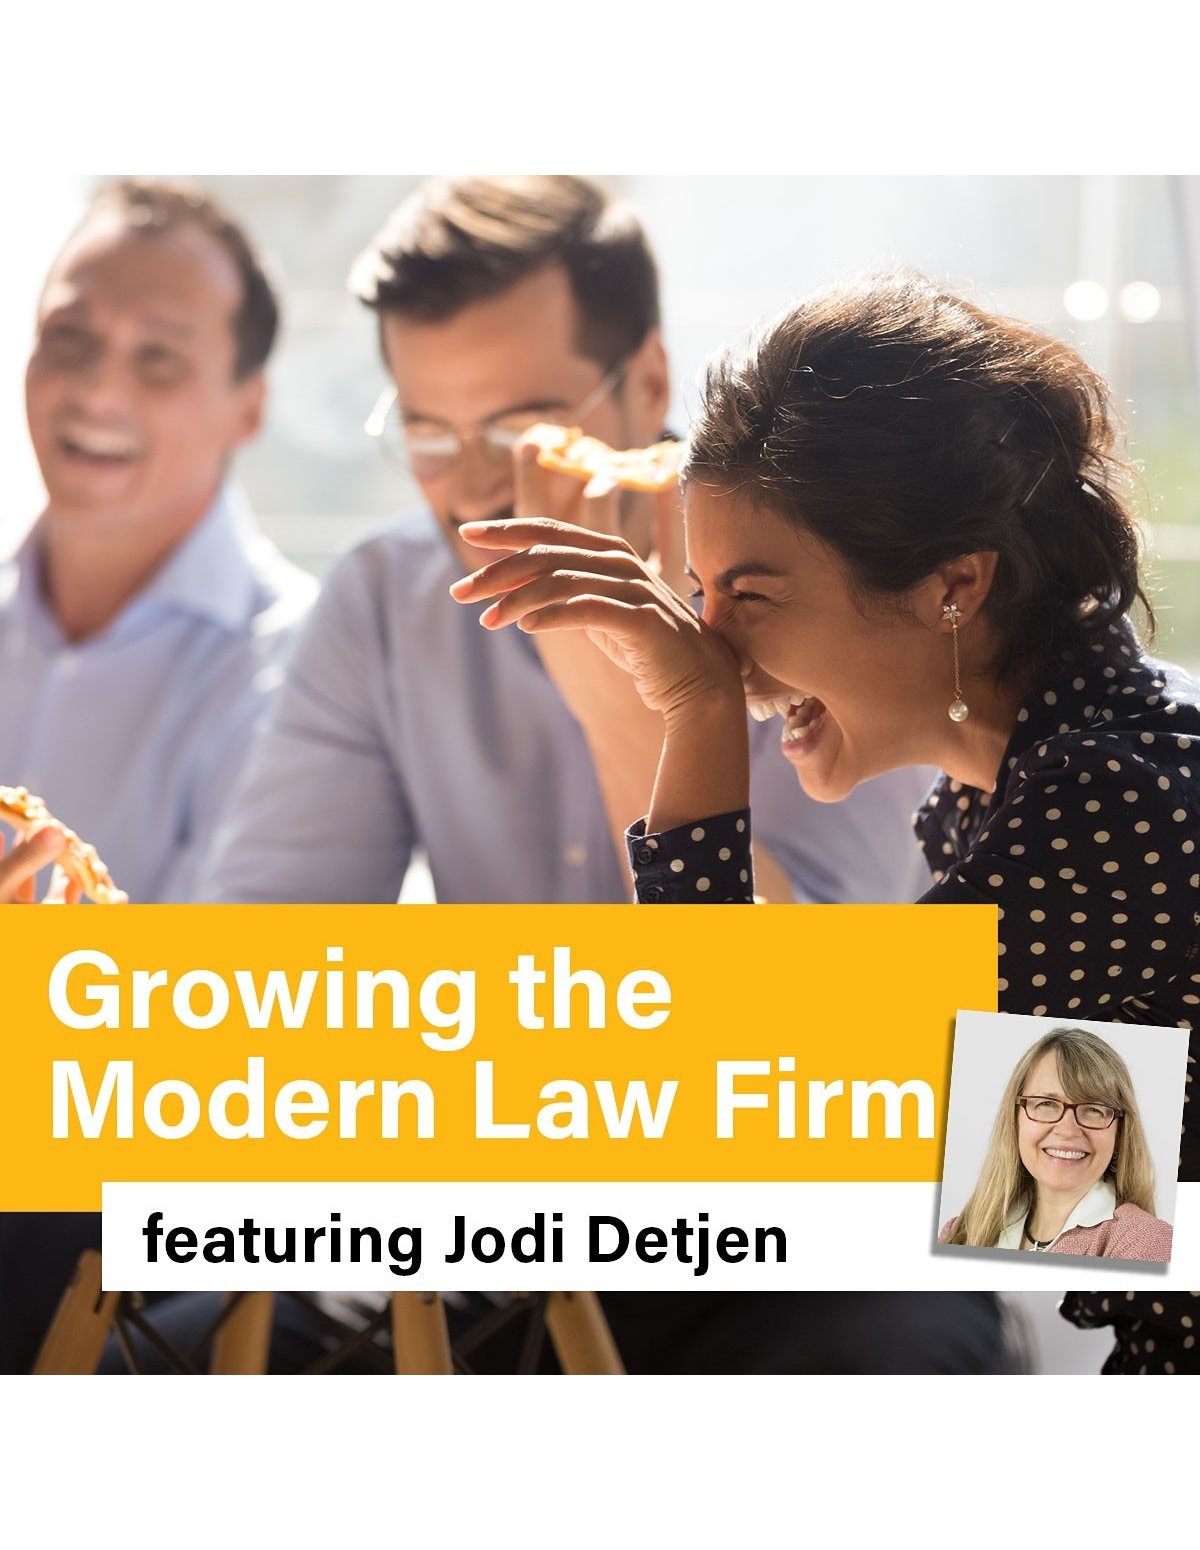 Growing the Modern Law Firm